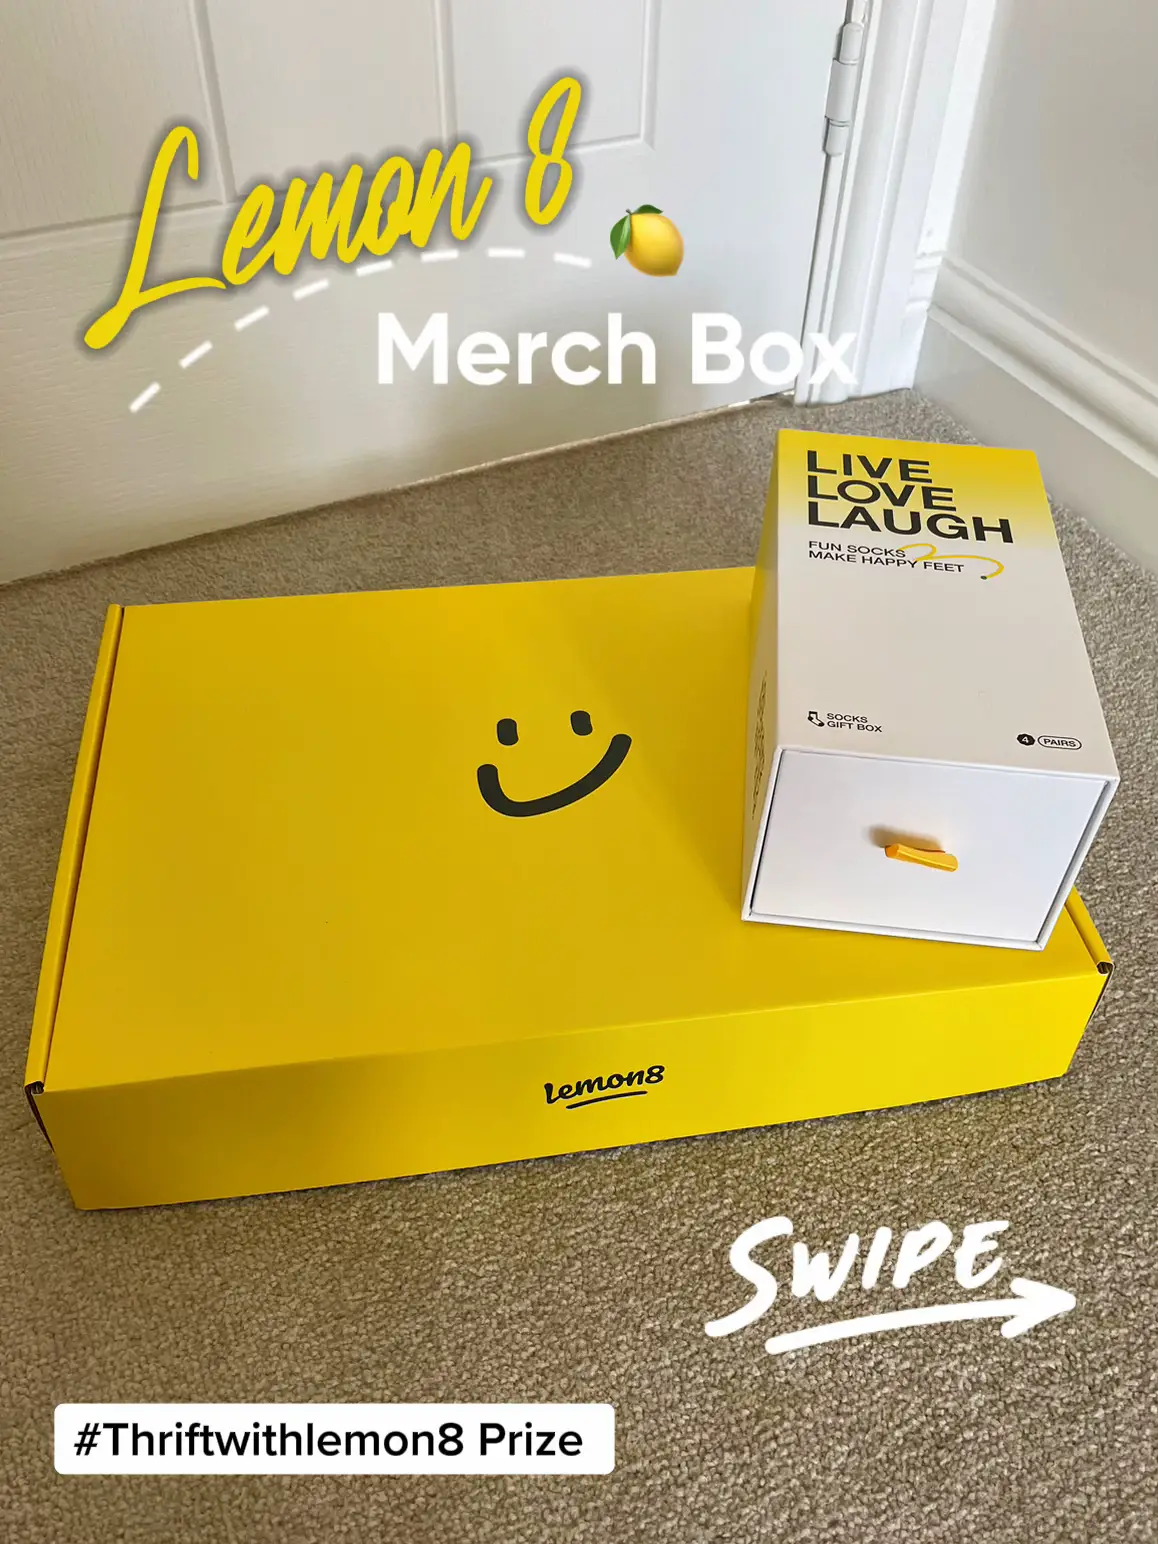  A box of lemon 8 sweets is on a table.